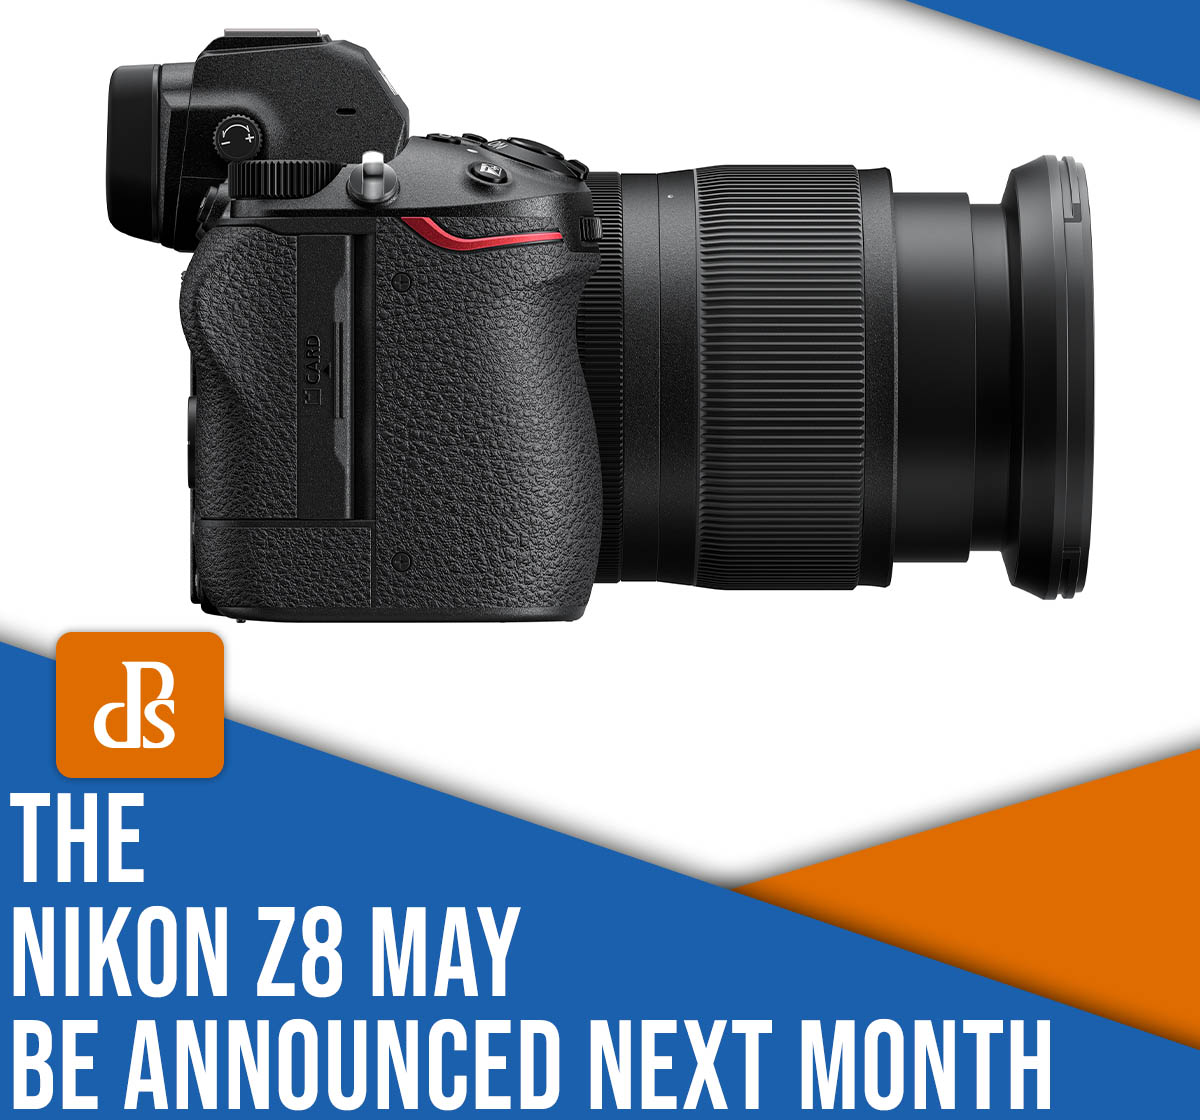 The Nikon Z8 may be announced next month